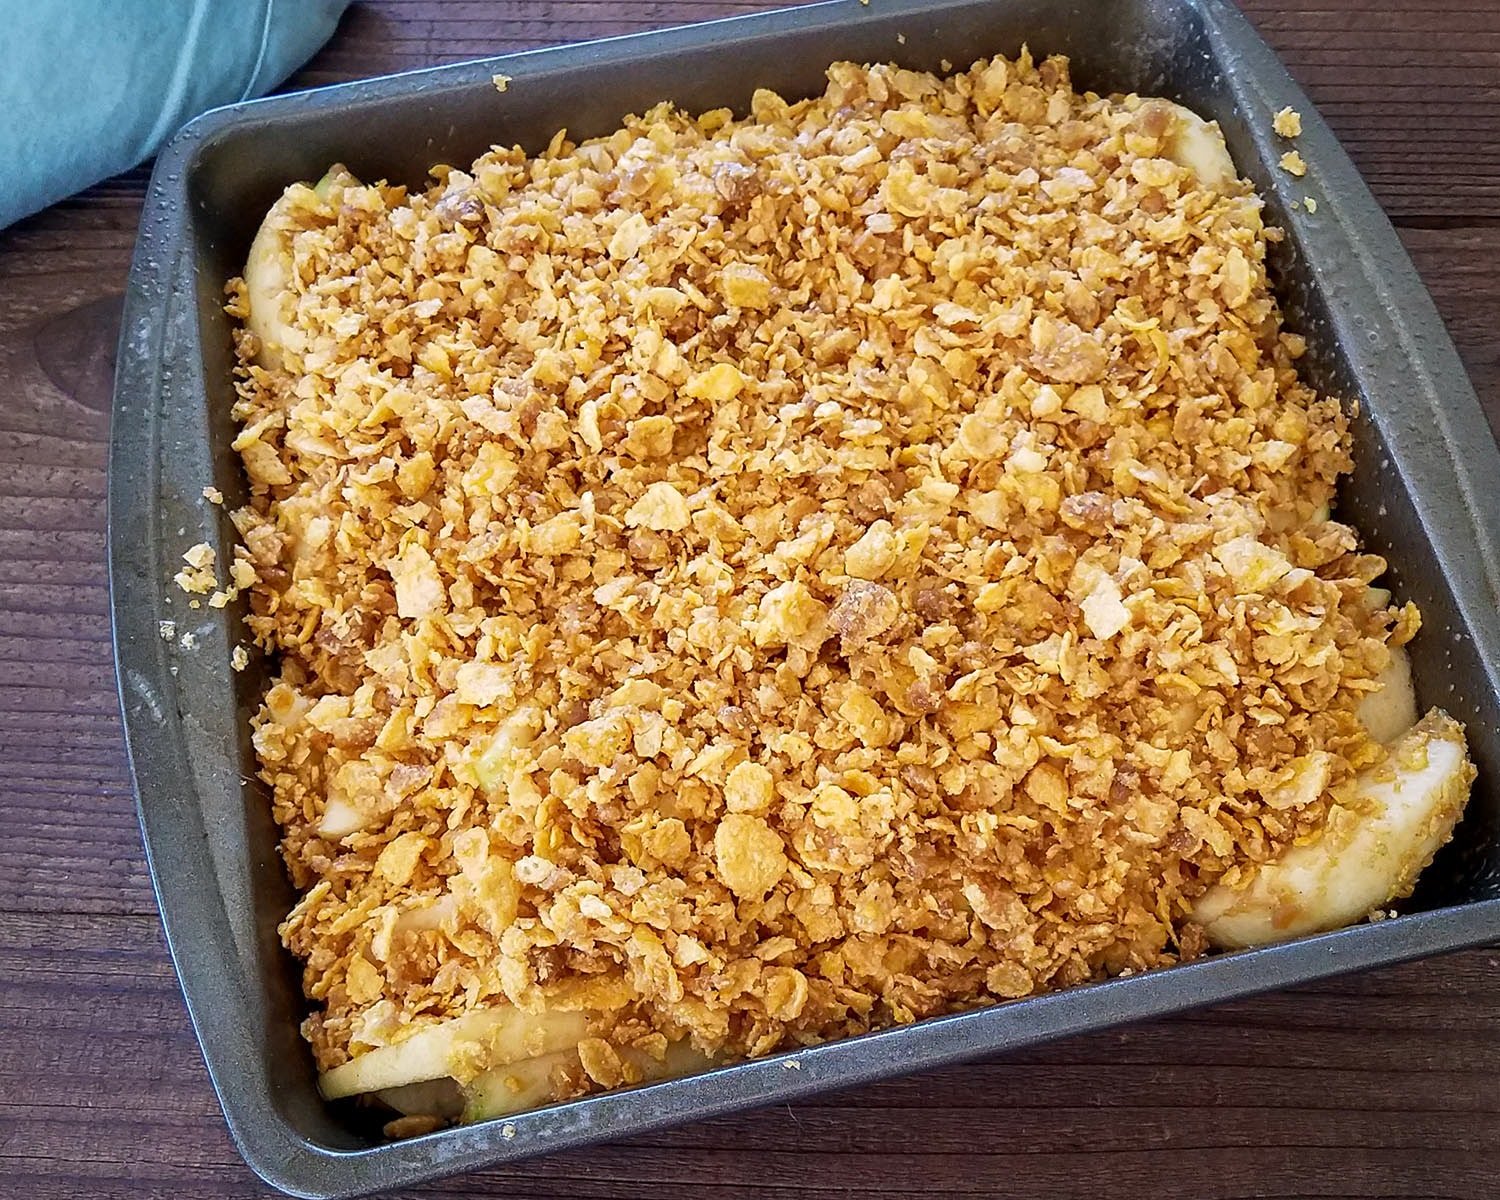 sliced apples in a baking pan with a corn flakes crumb topping